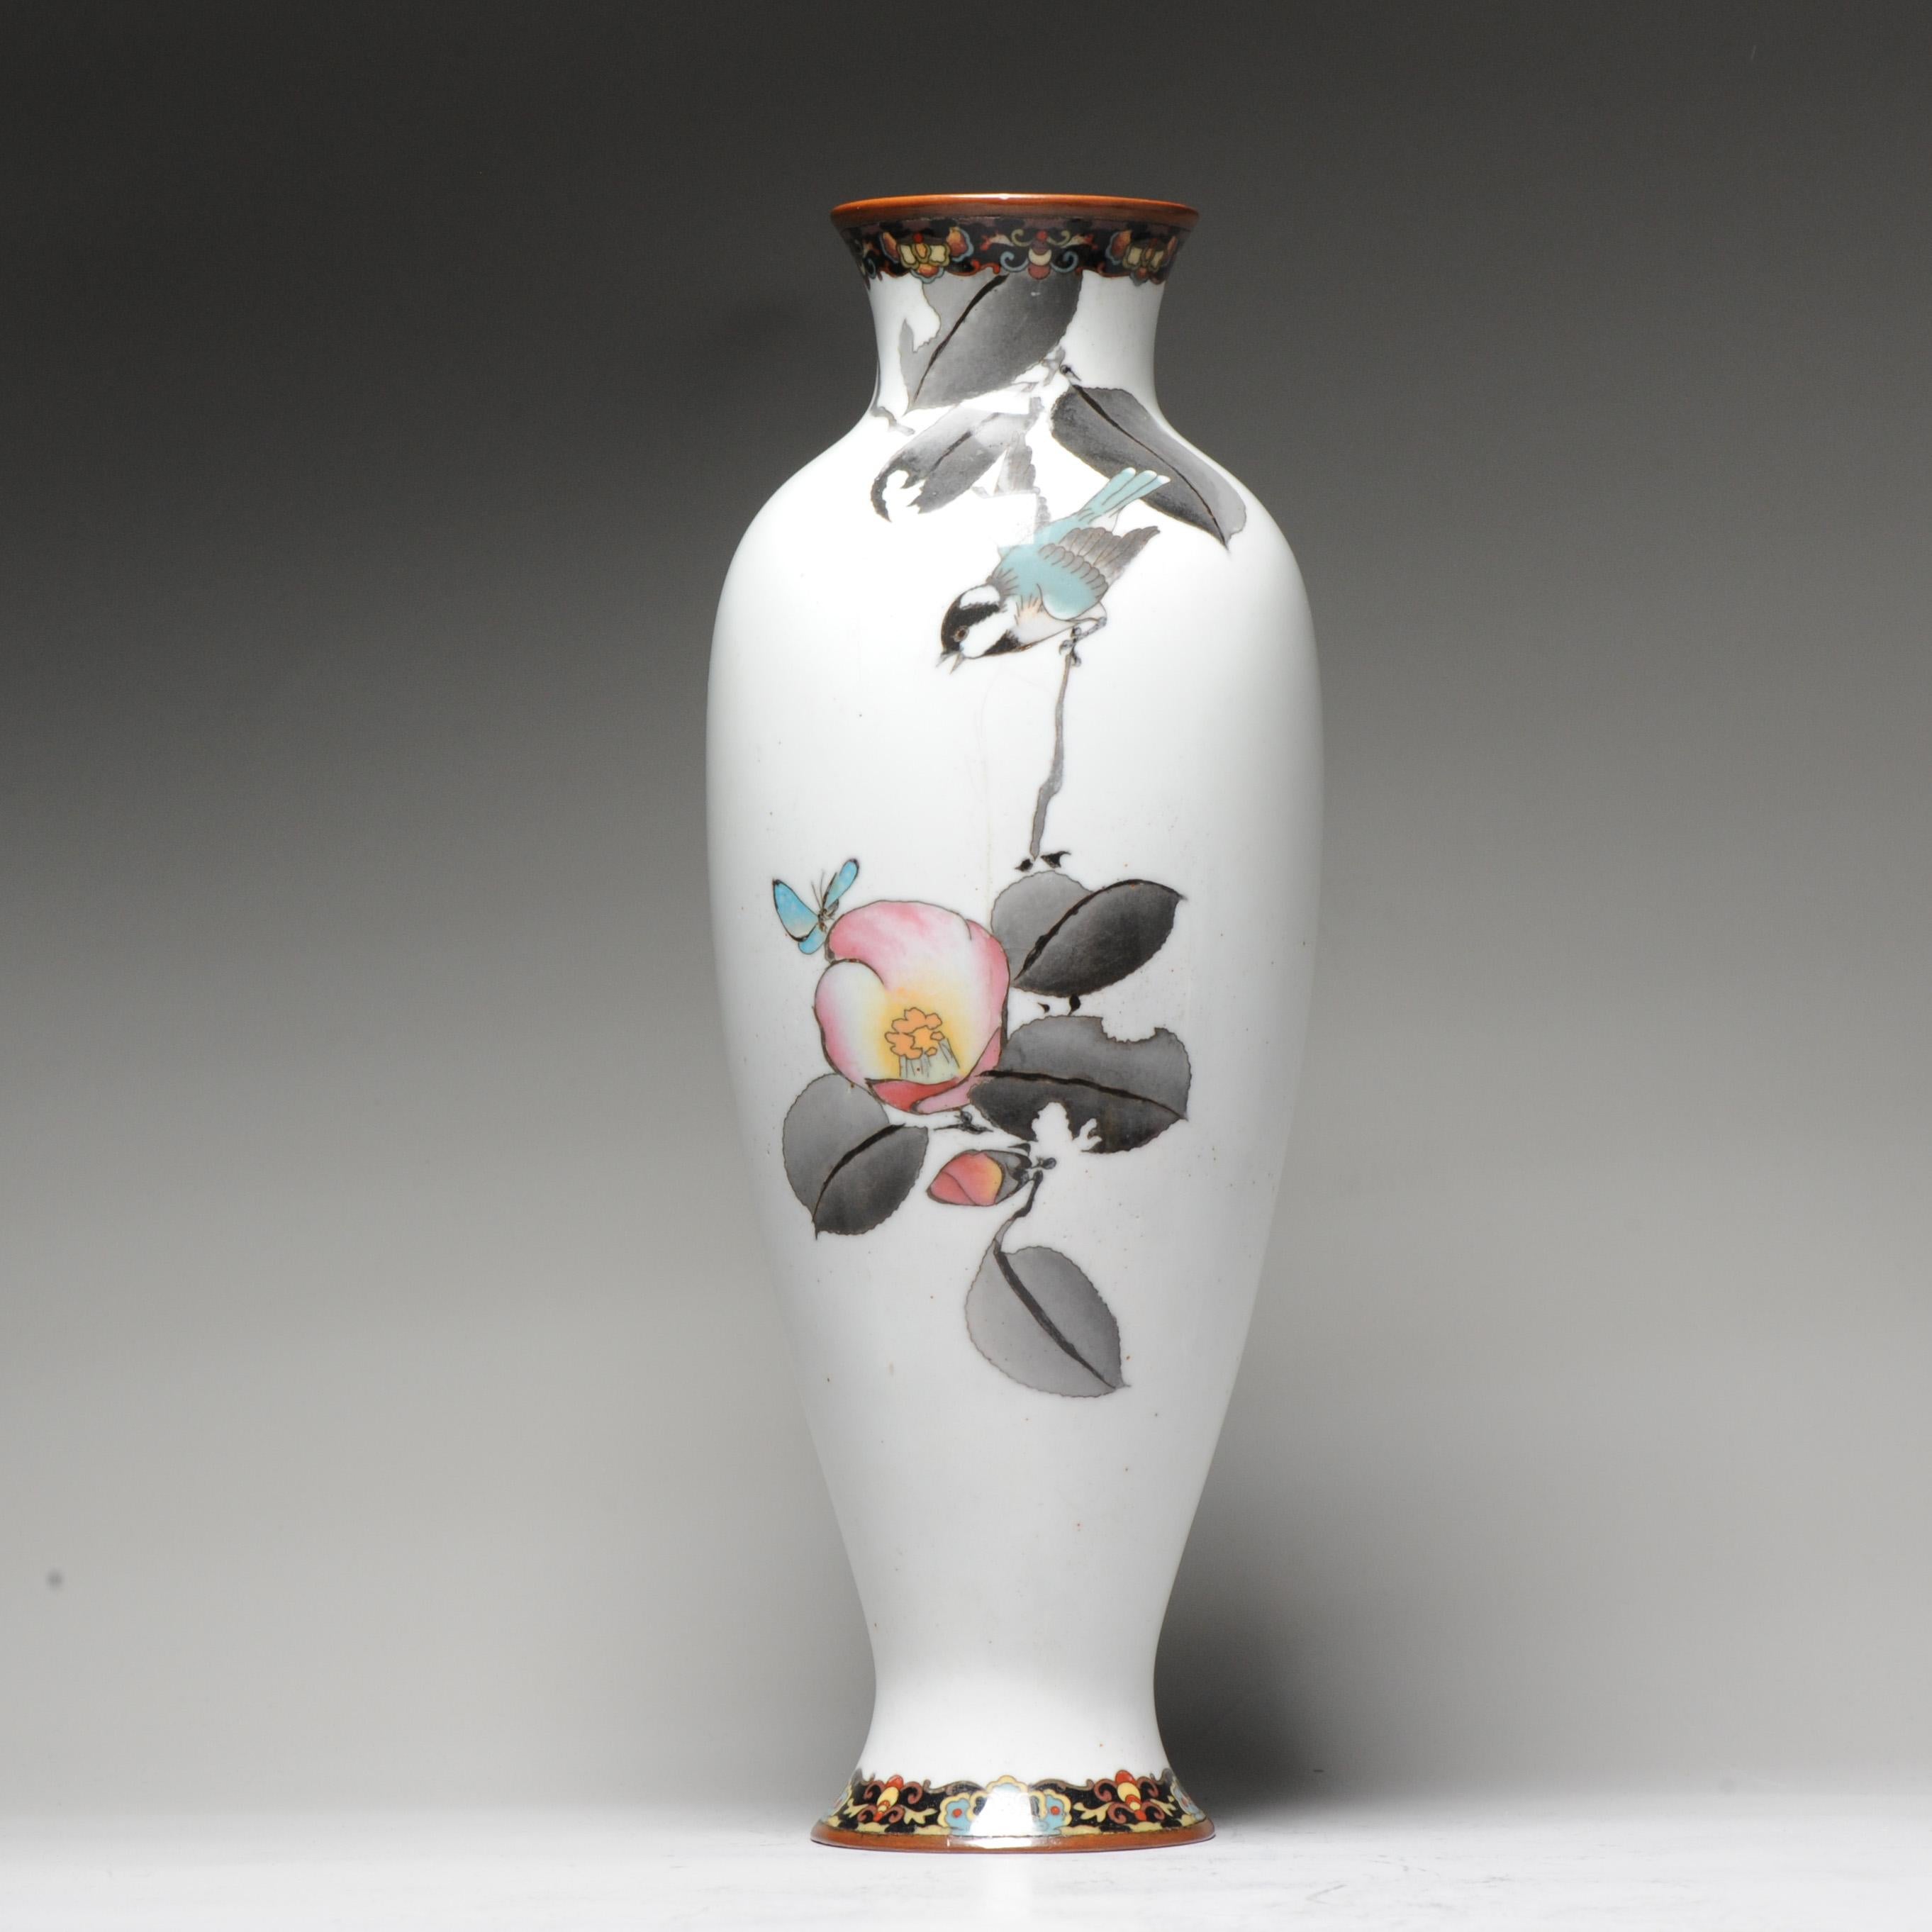 Lovely and beautifully made piece. With a stunning bird and peach scene.

Originally of the Catherina collection of Japanese bronzes and cloisonne that was partly auctioned in Amsterdam in 2006 at Sothebys. This piece is pictured in the catalogue of